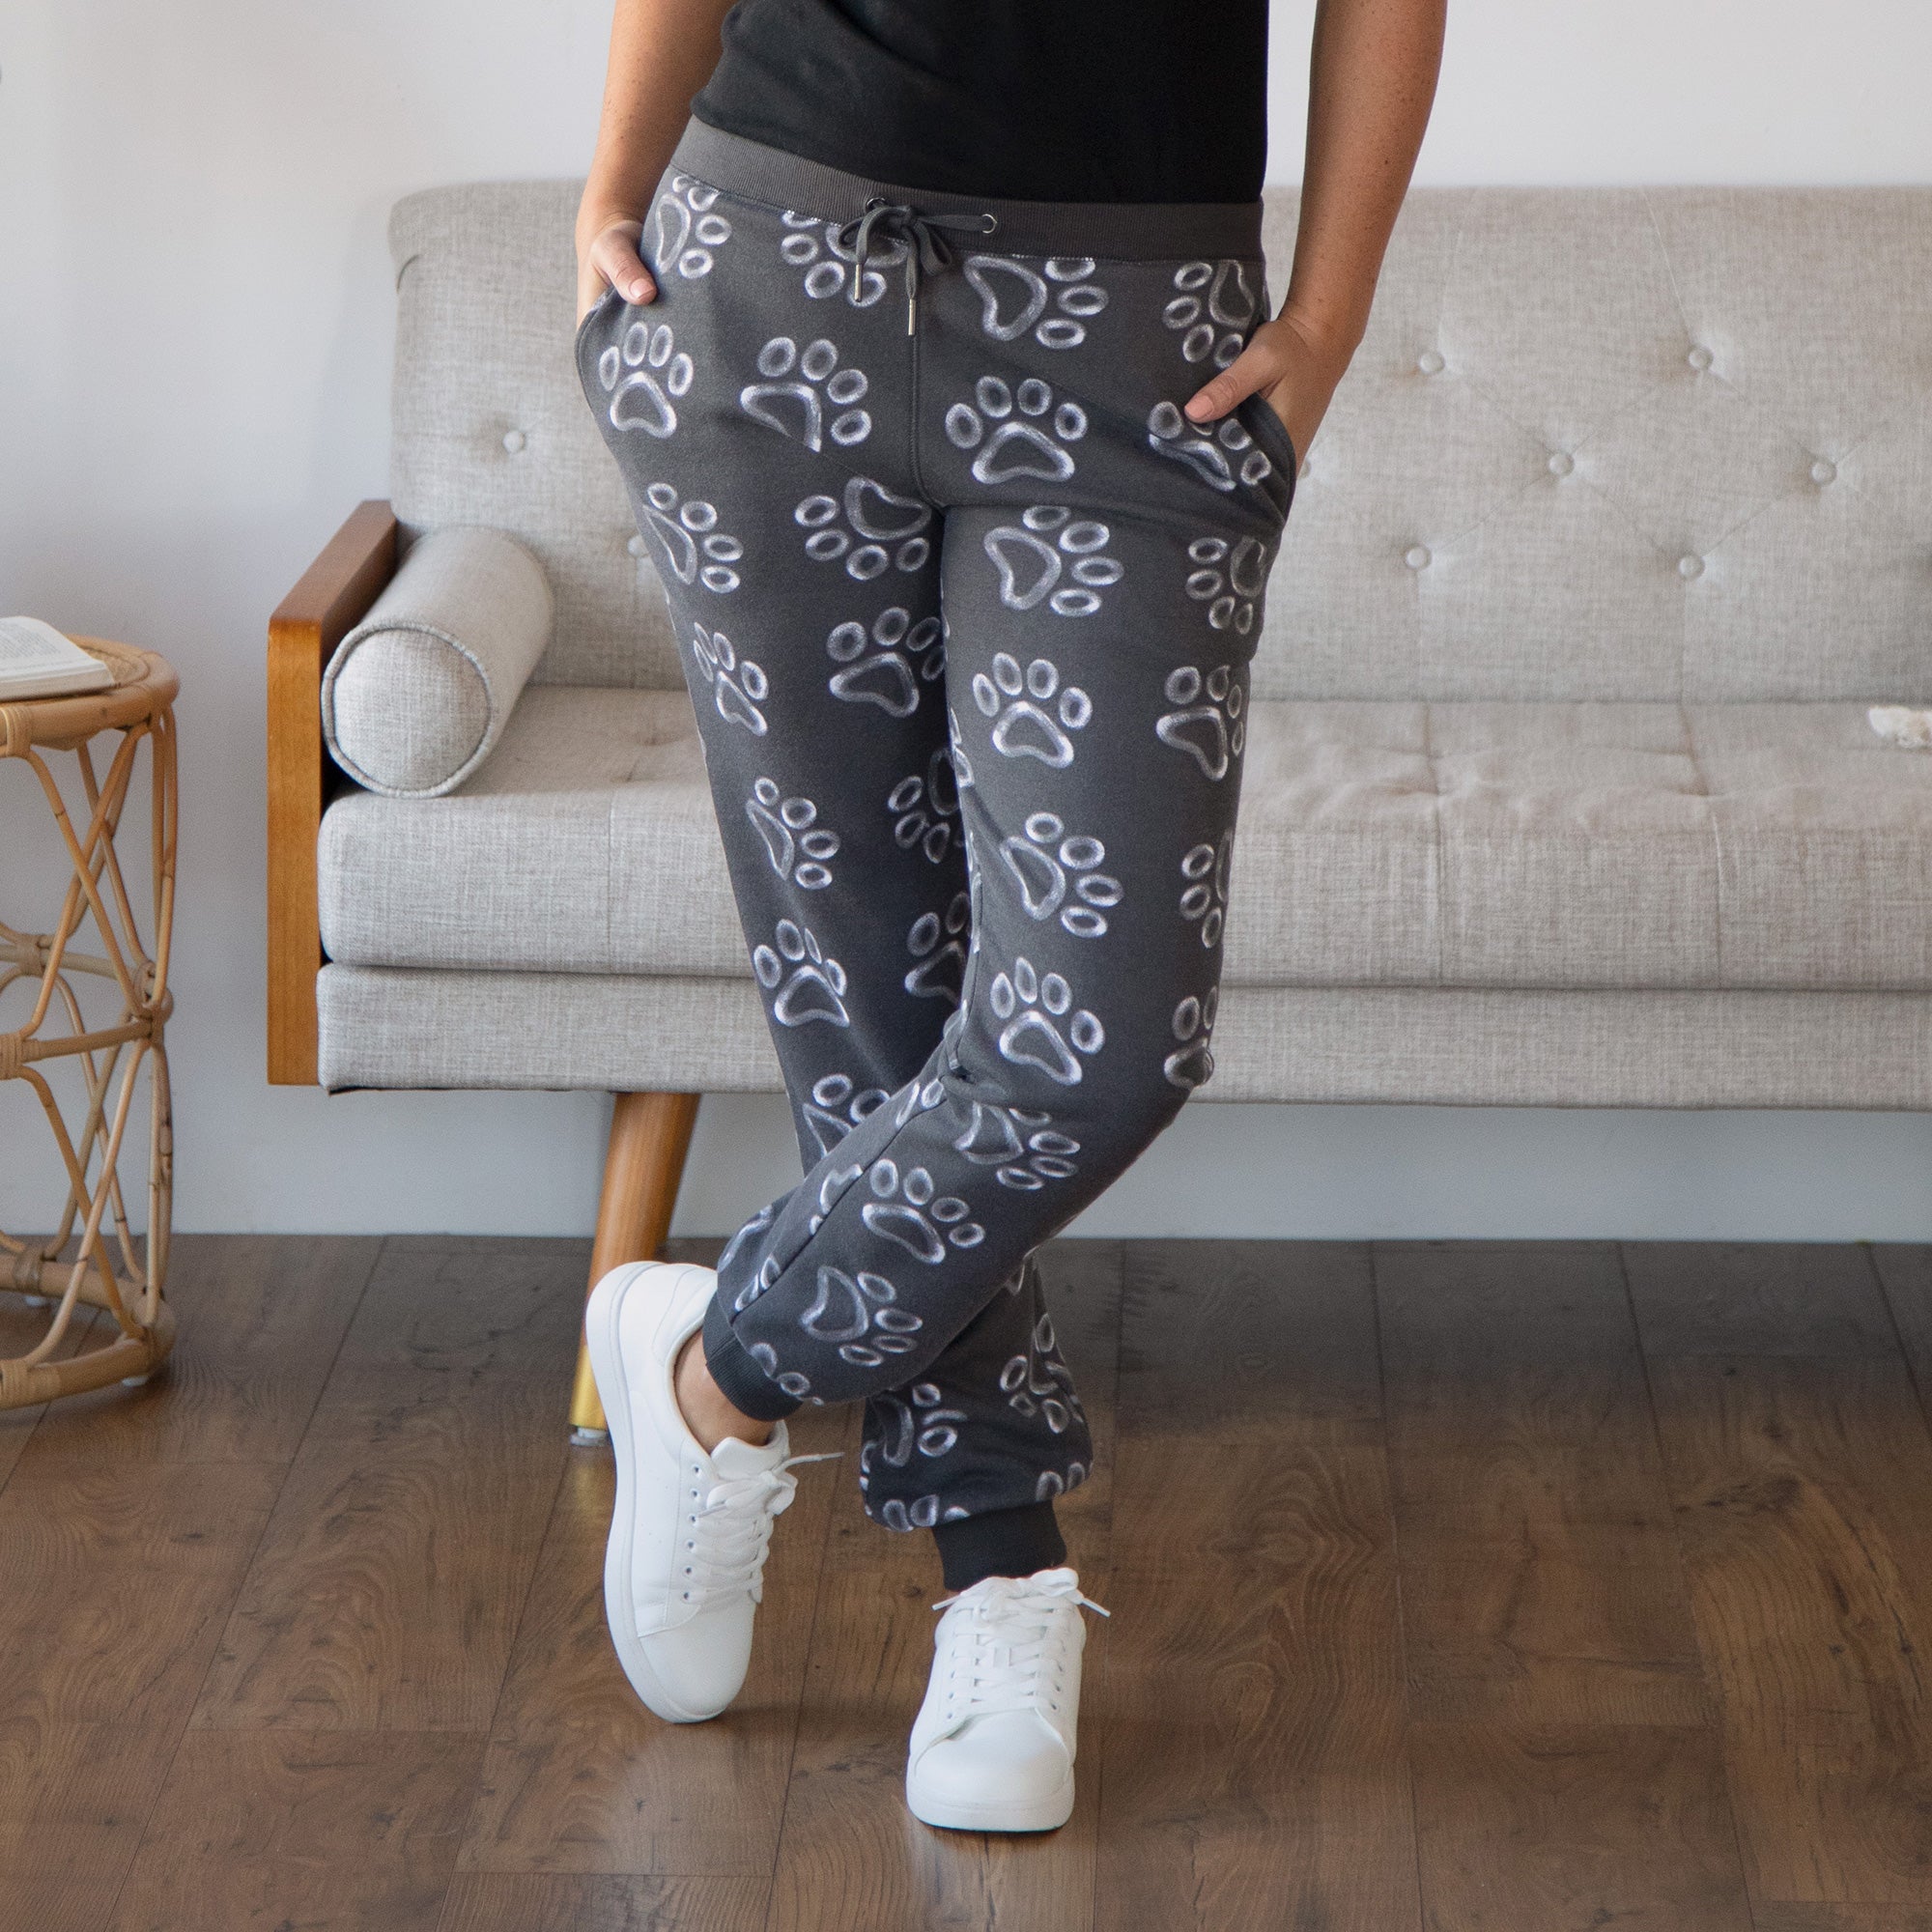 All Over Chalk Paw Sweatpants - 1X